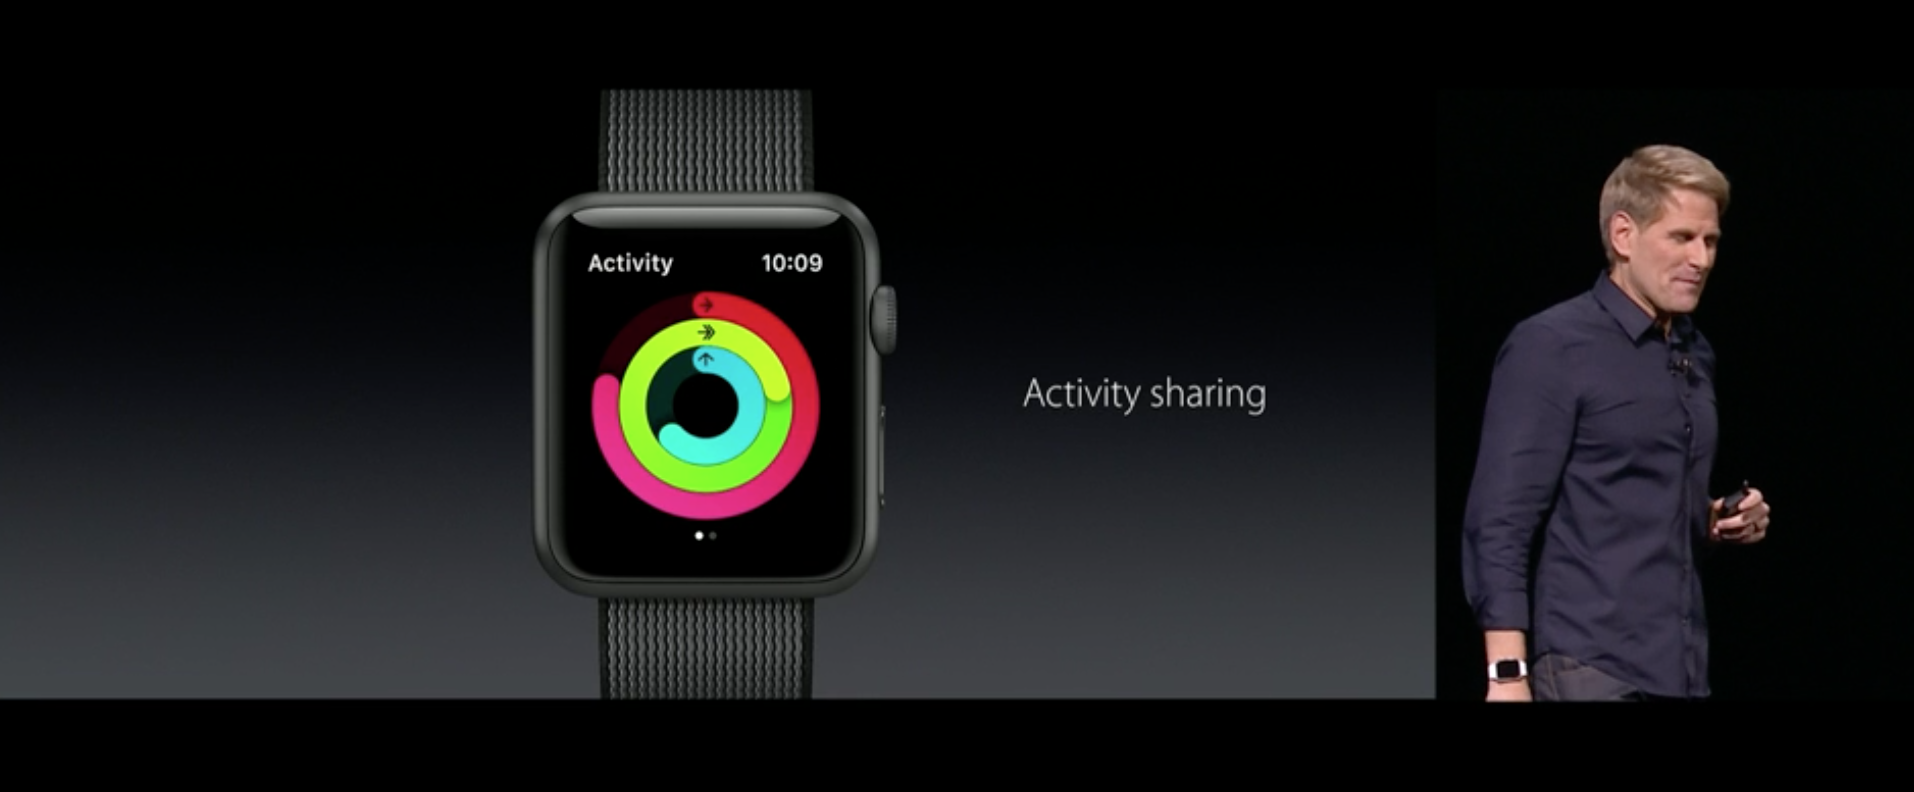 Activity Sharing is a Major New Feature in watchOS 3